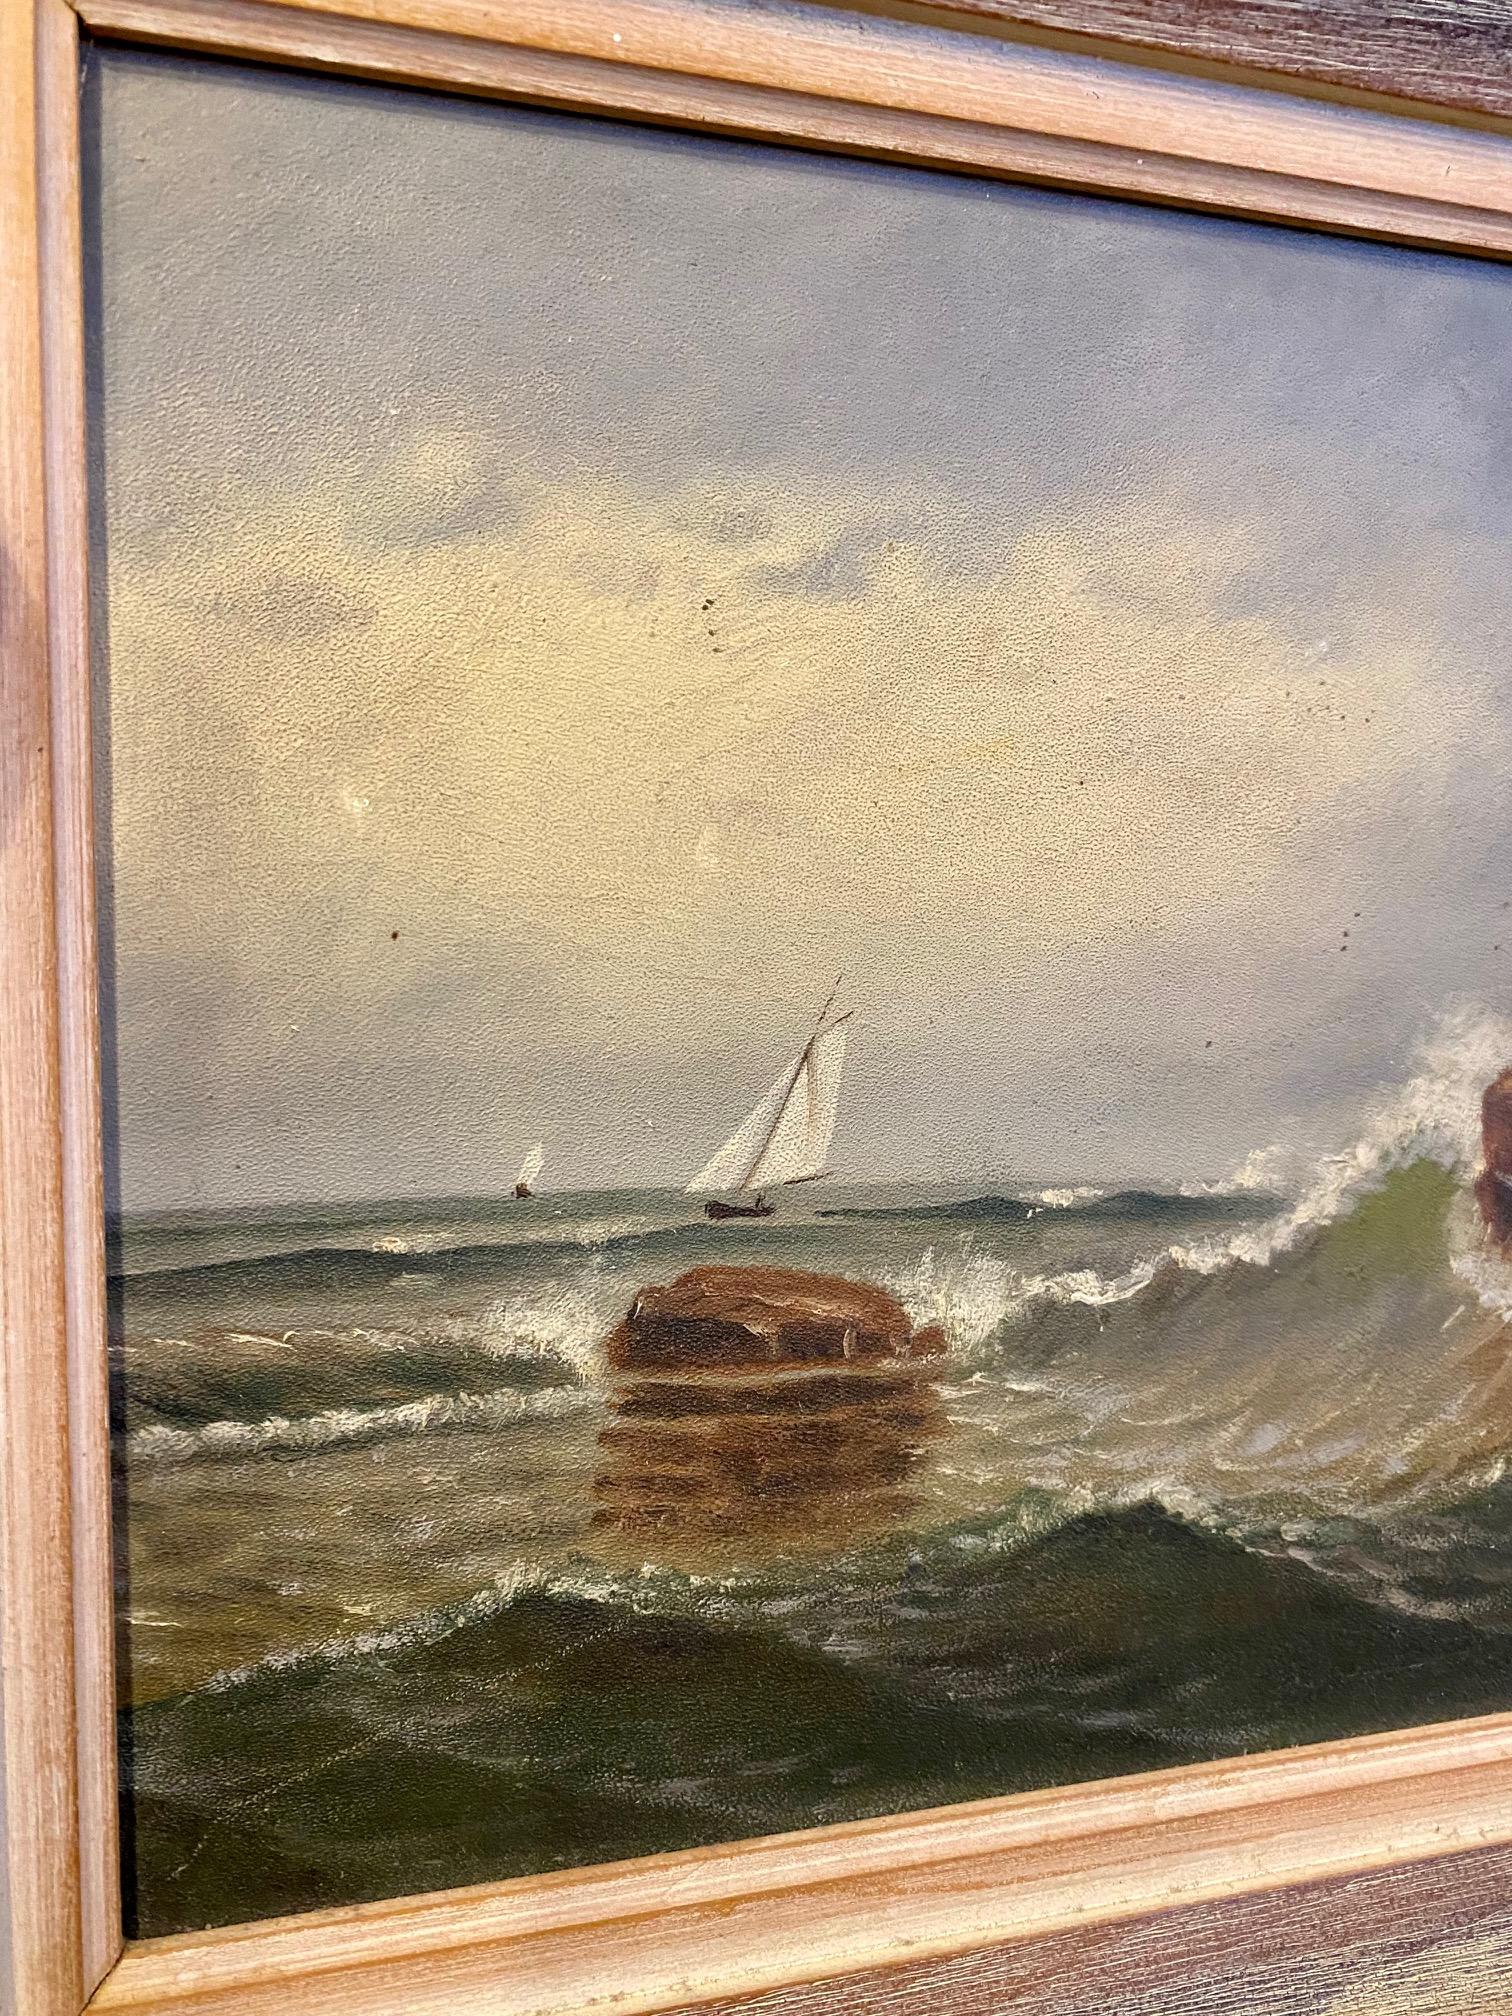 Antique Folk Art Maine rocky coast seascape, by D. A. Fisher (1867 - 1940), circa 1900, an oil on board seascape with gentle combers breaking on rocks on the foreground, with two sloops sailing in the background, signed lower right. The reverse